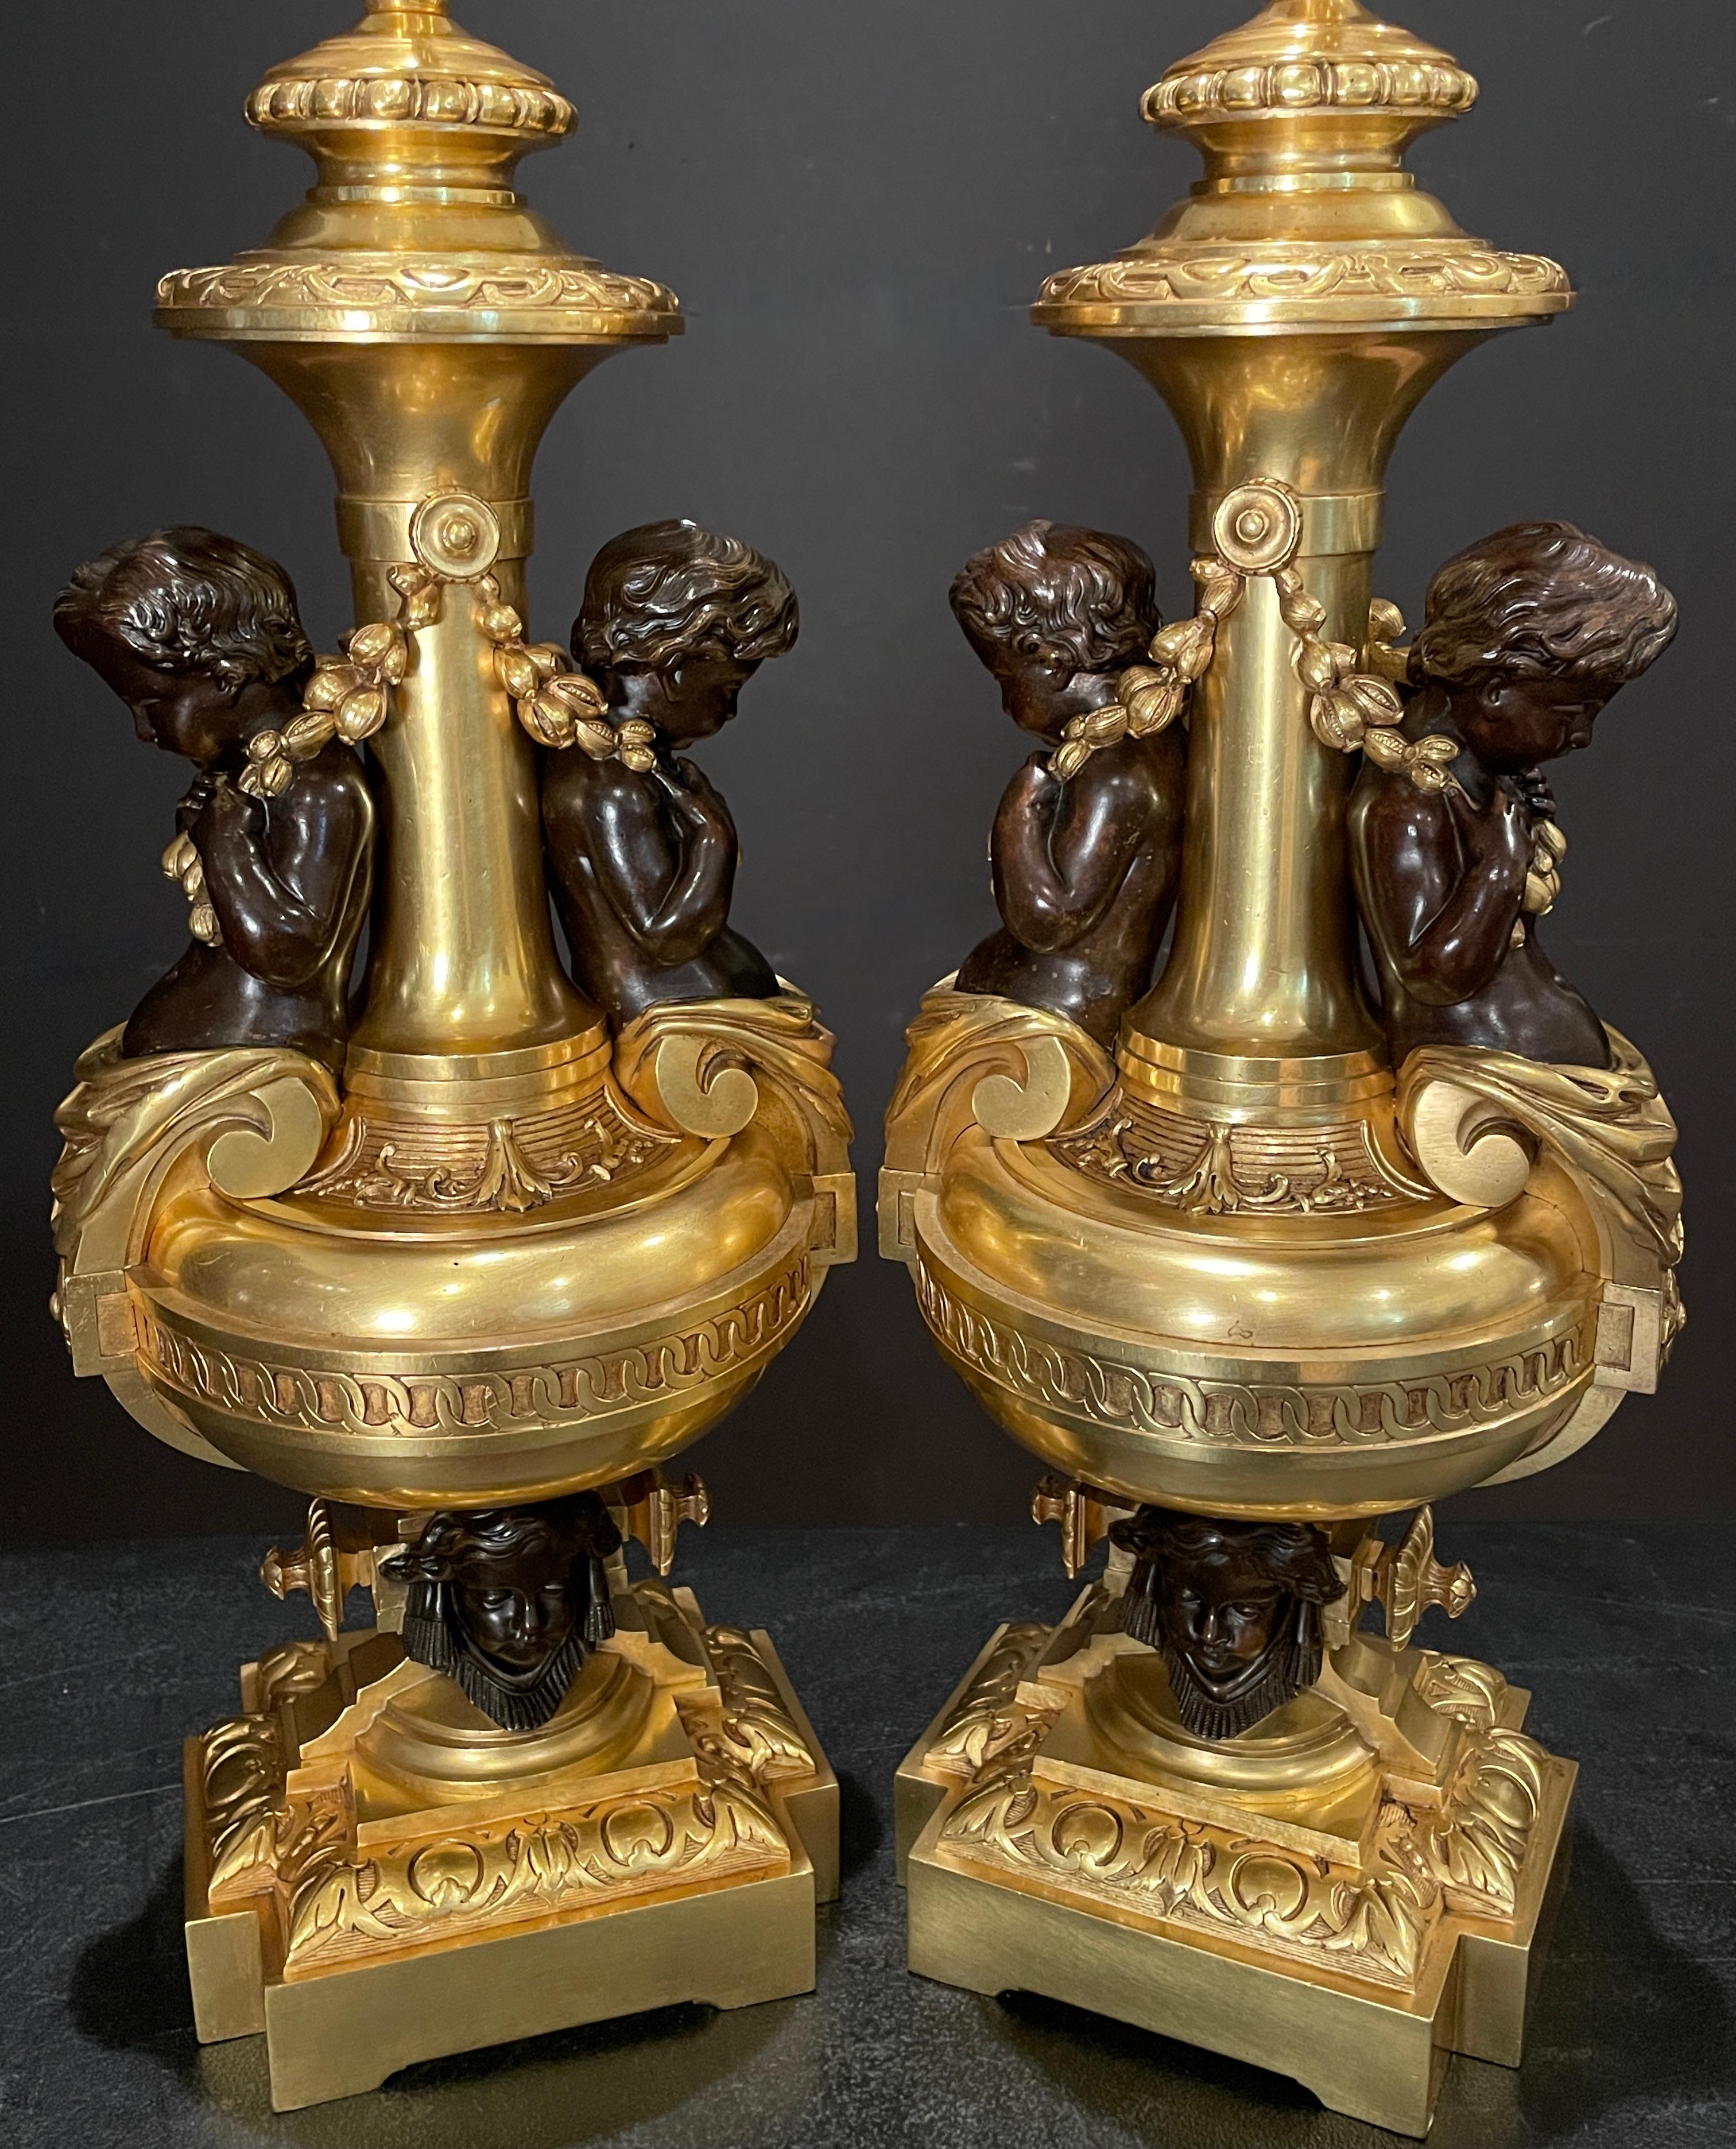 A rare and wonderful pair of French 19th century ormolu garnitures as lamps. Gilt urns with patinated putti torso in caryatid form holding garland seated on a base with cherub faces. Of large and full stature. Finest quality with beautiful doré and